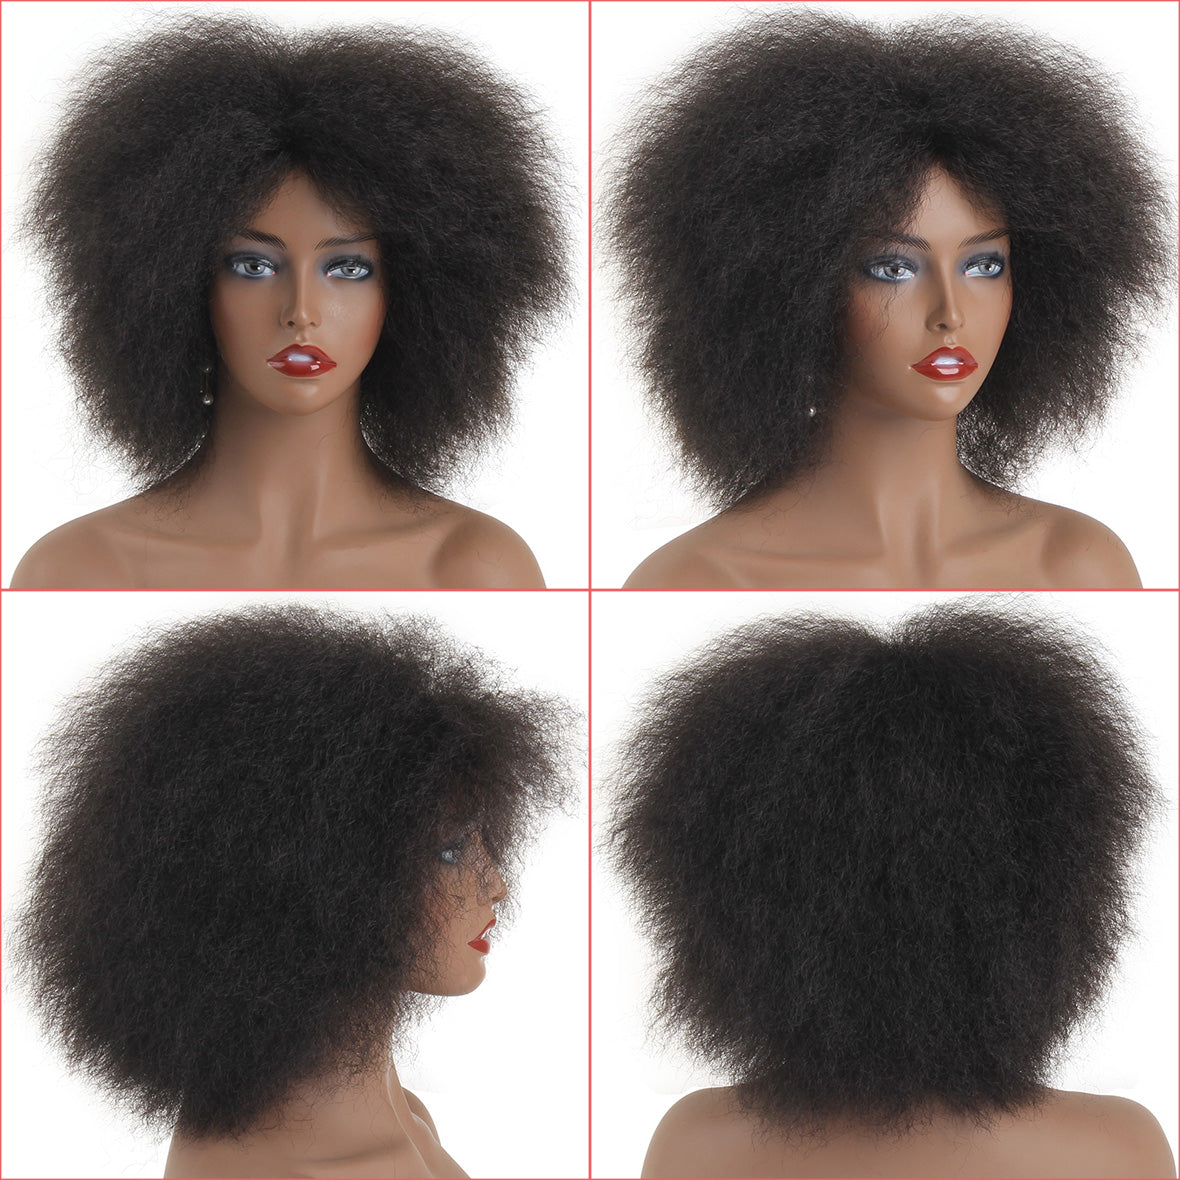 Xtrend Afro Kinky Curly Wig Synthetic 6Inch 100g Black Natural Heat Resistant Cosplay Wigs for Black Women